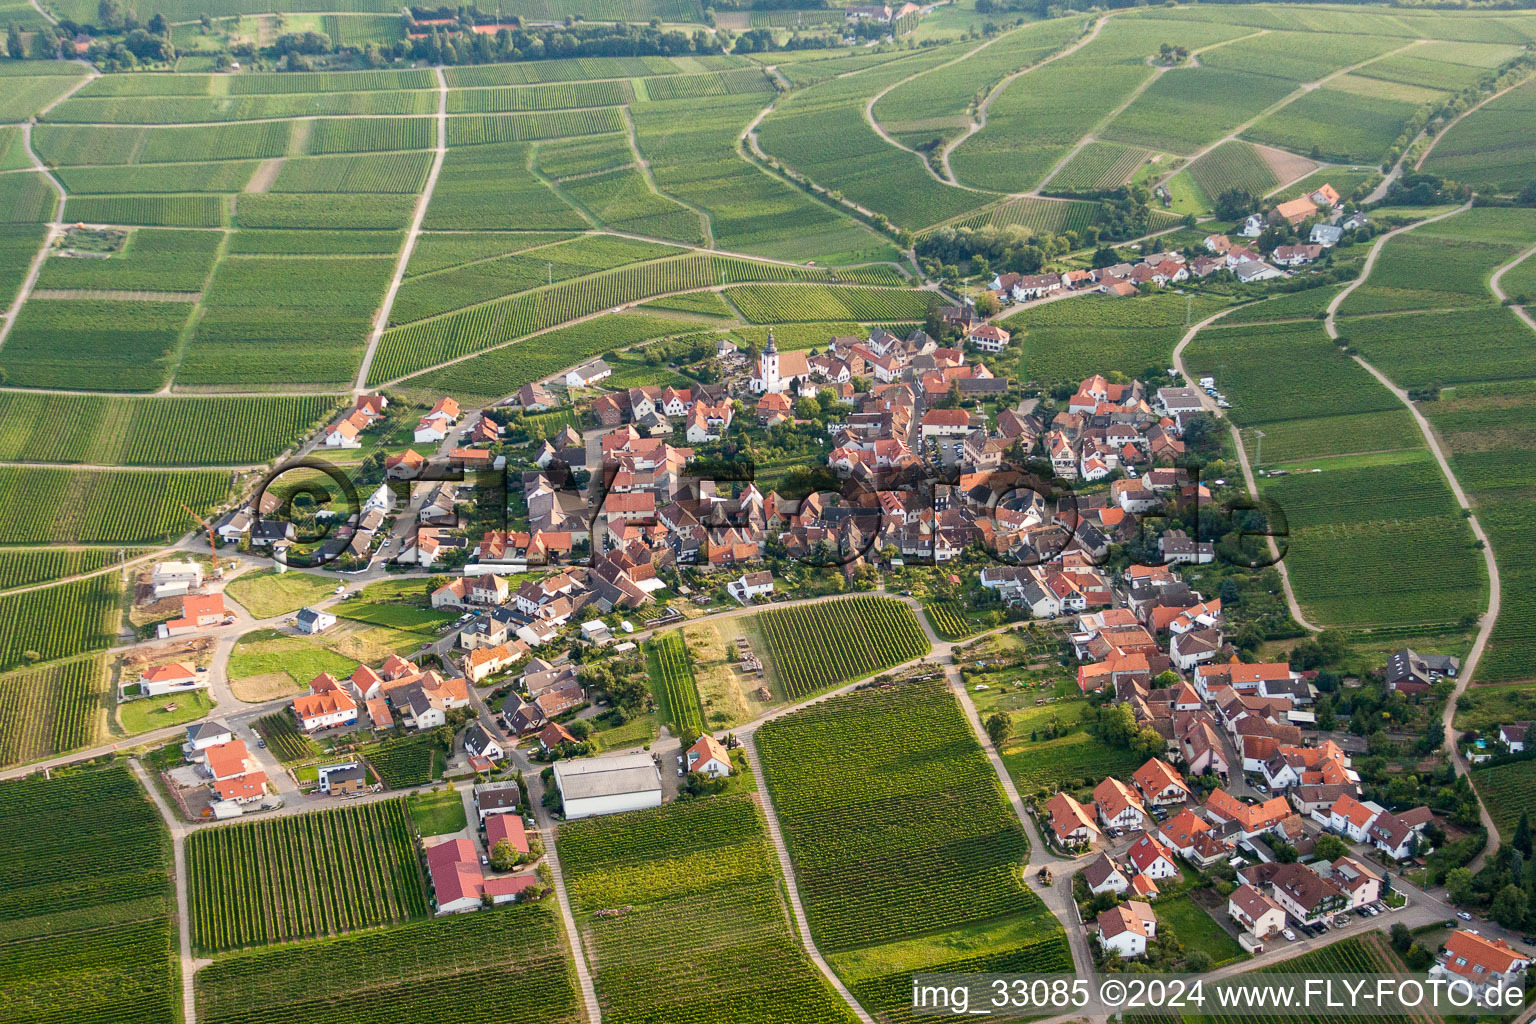 Aerial view of Village - view on the edge of agricultural fields and farmland in Weyher in der Pfalz in the state Rhineland-Palatinate, Germany